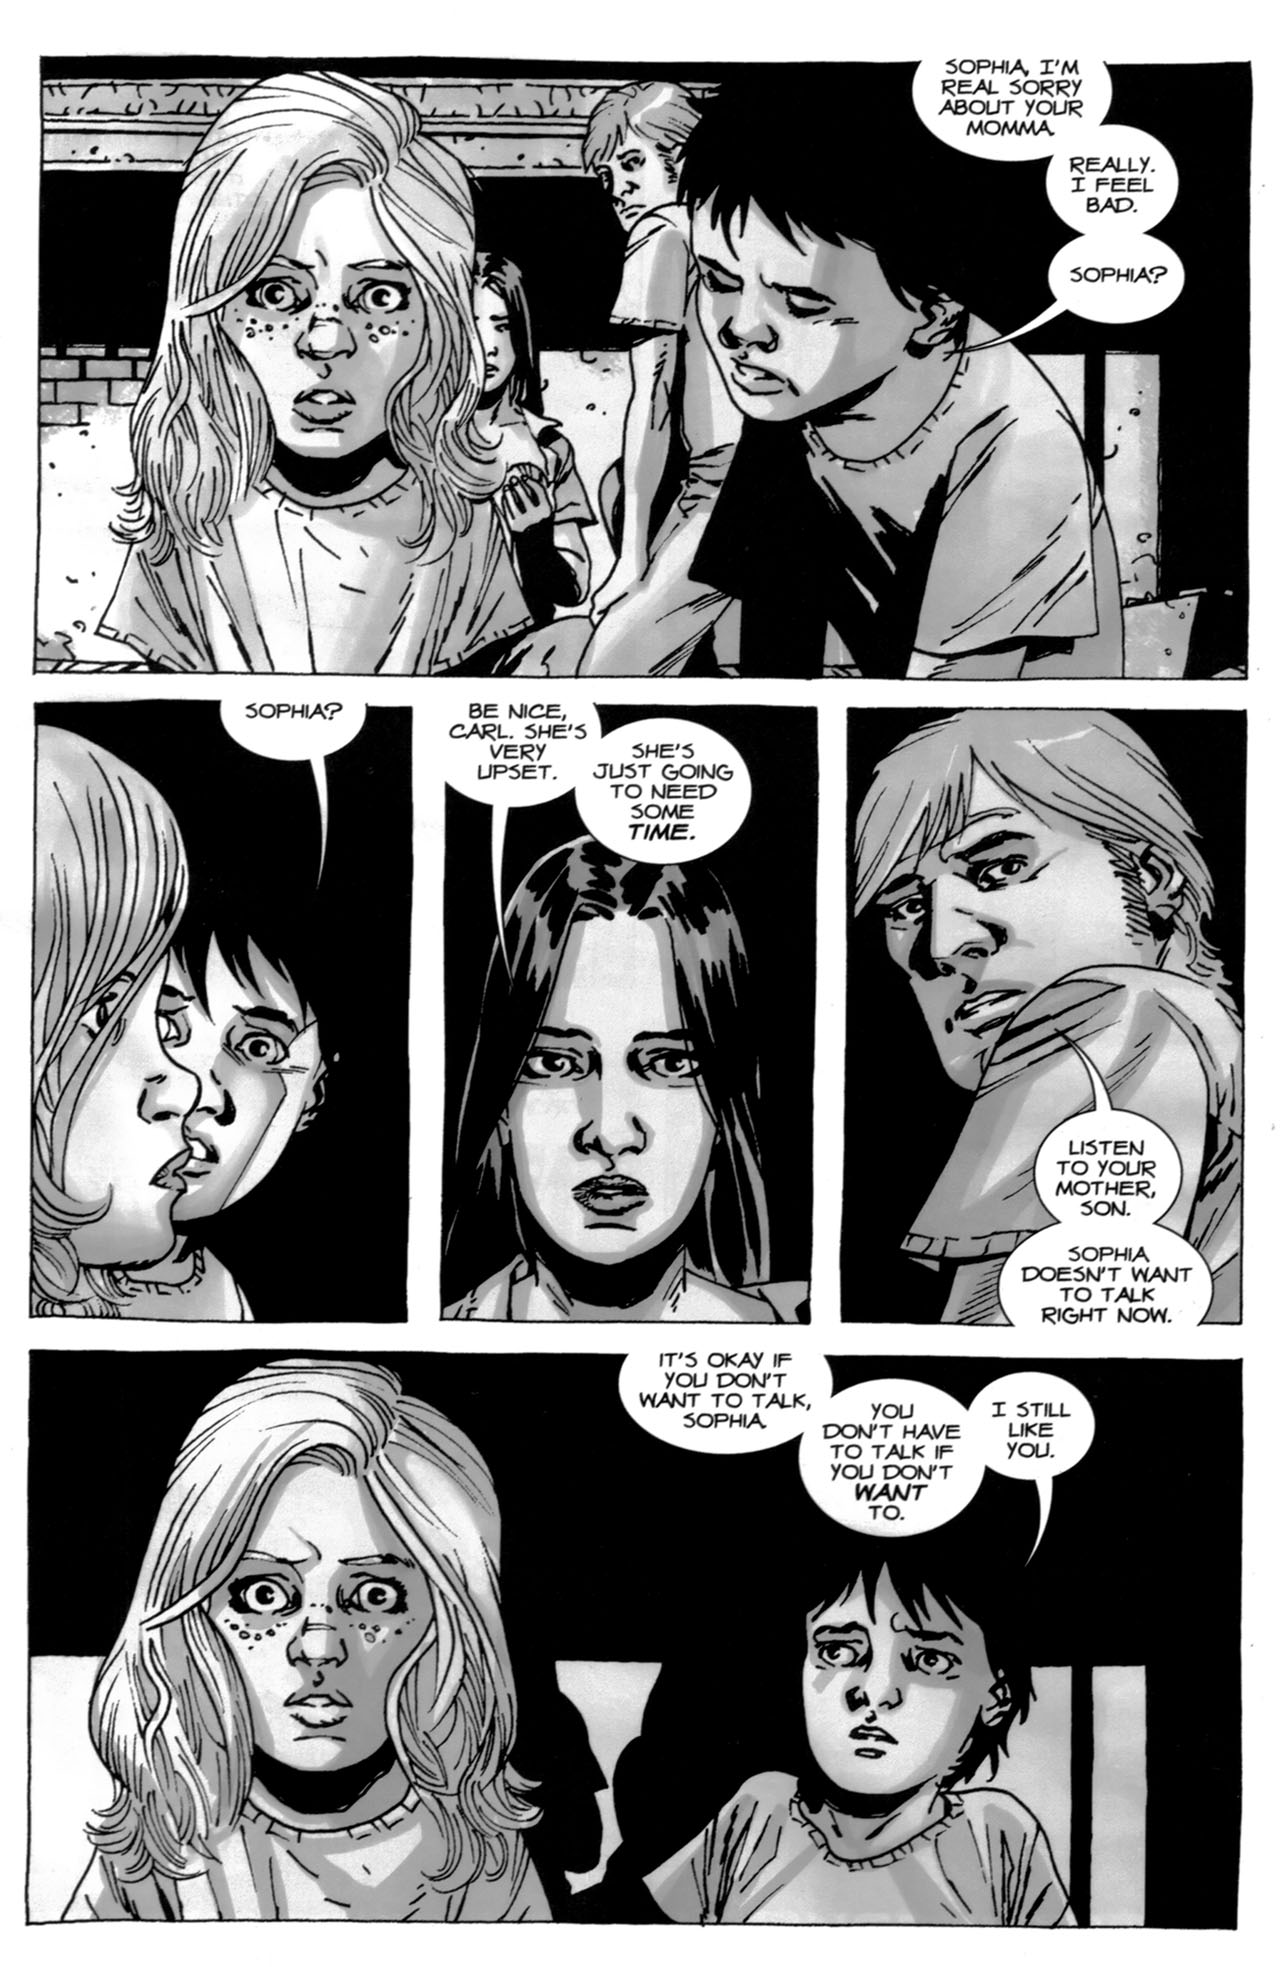 comics - Sophia, I'M Real Sorry About Your Momma Really. I Feel Bad. Sophia? Sophia? Be Nice, Carl. She'S Very She'S Upset. Just Going To Need Some Time. Listen To Your Mother, Son. Sophia Doesn'T Want To Talk Right Now. It'S Okay If You Don'T Want To Tal